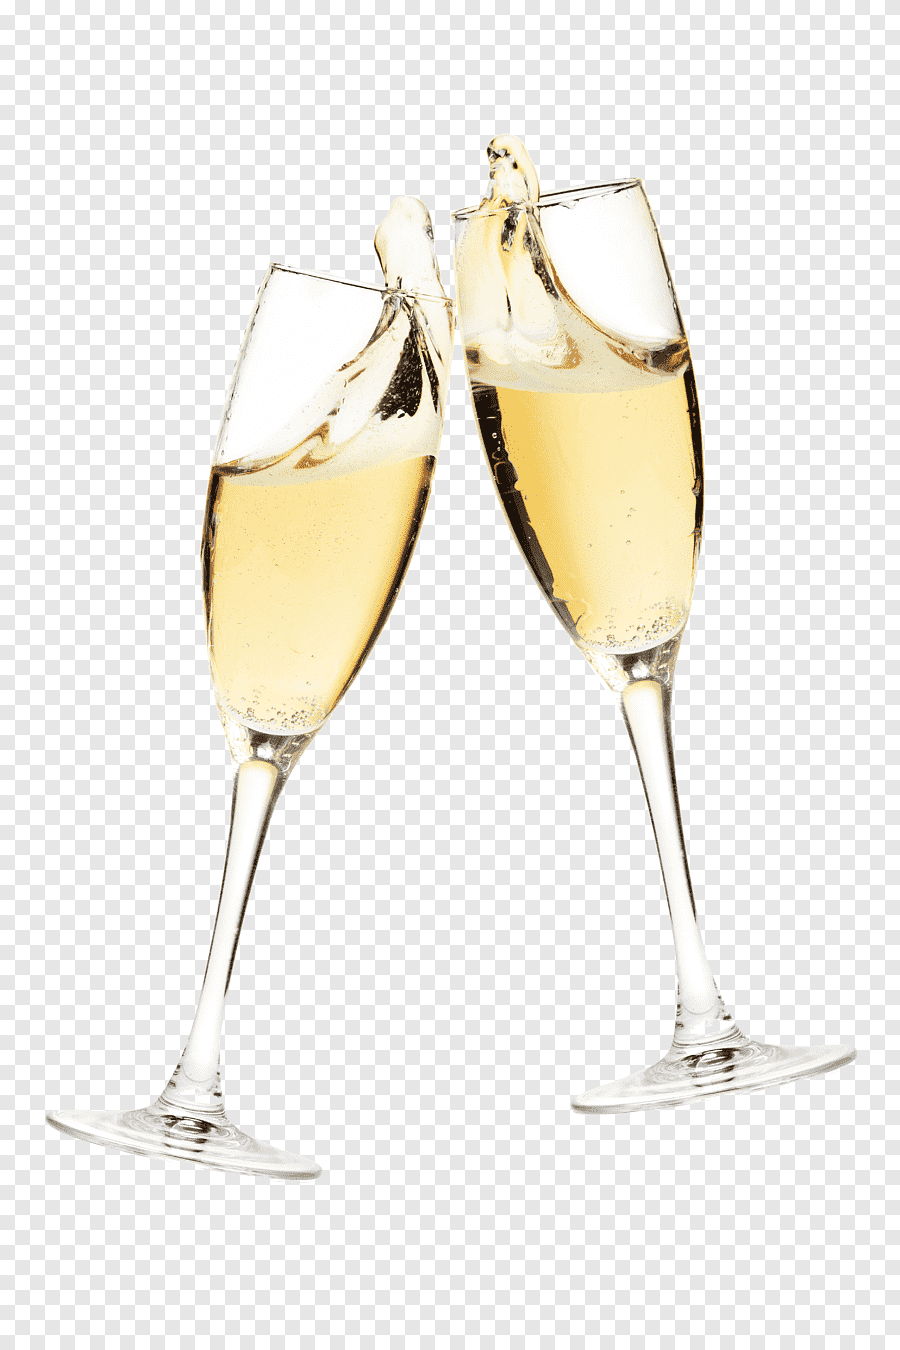 champagne glass png